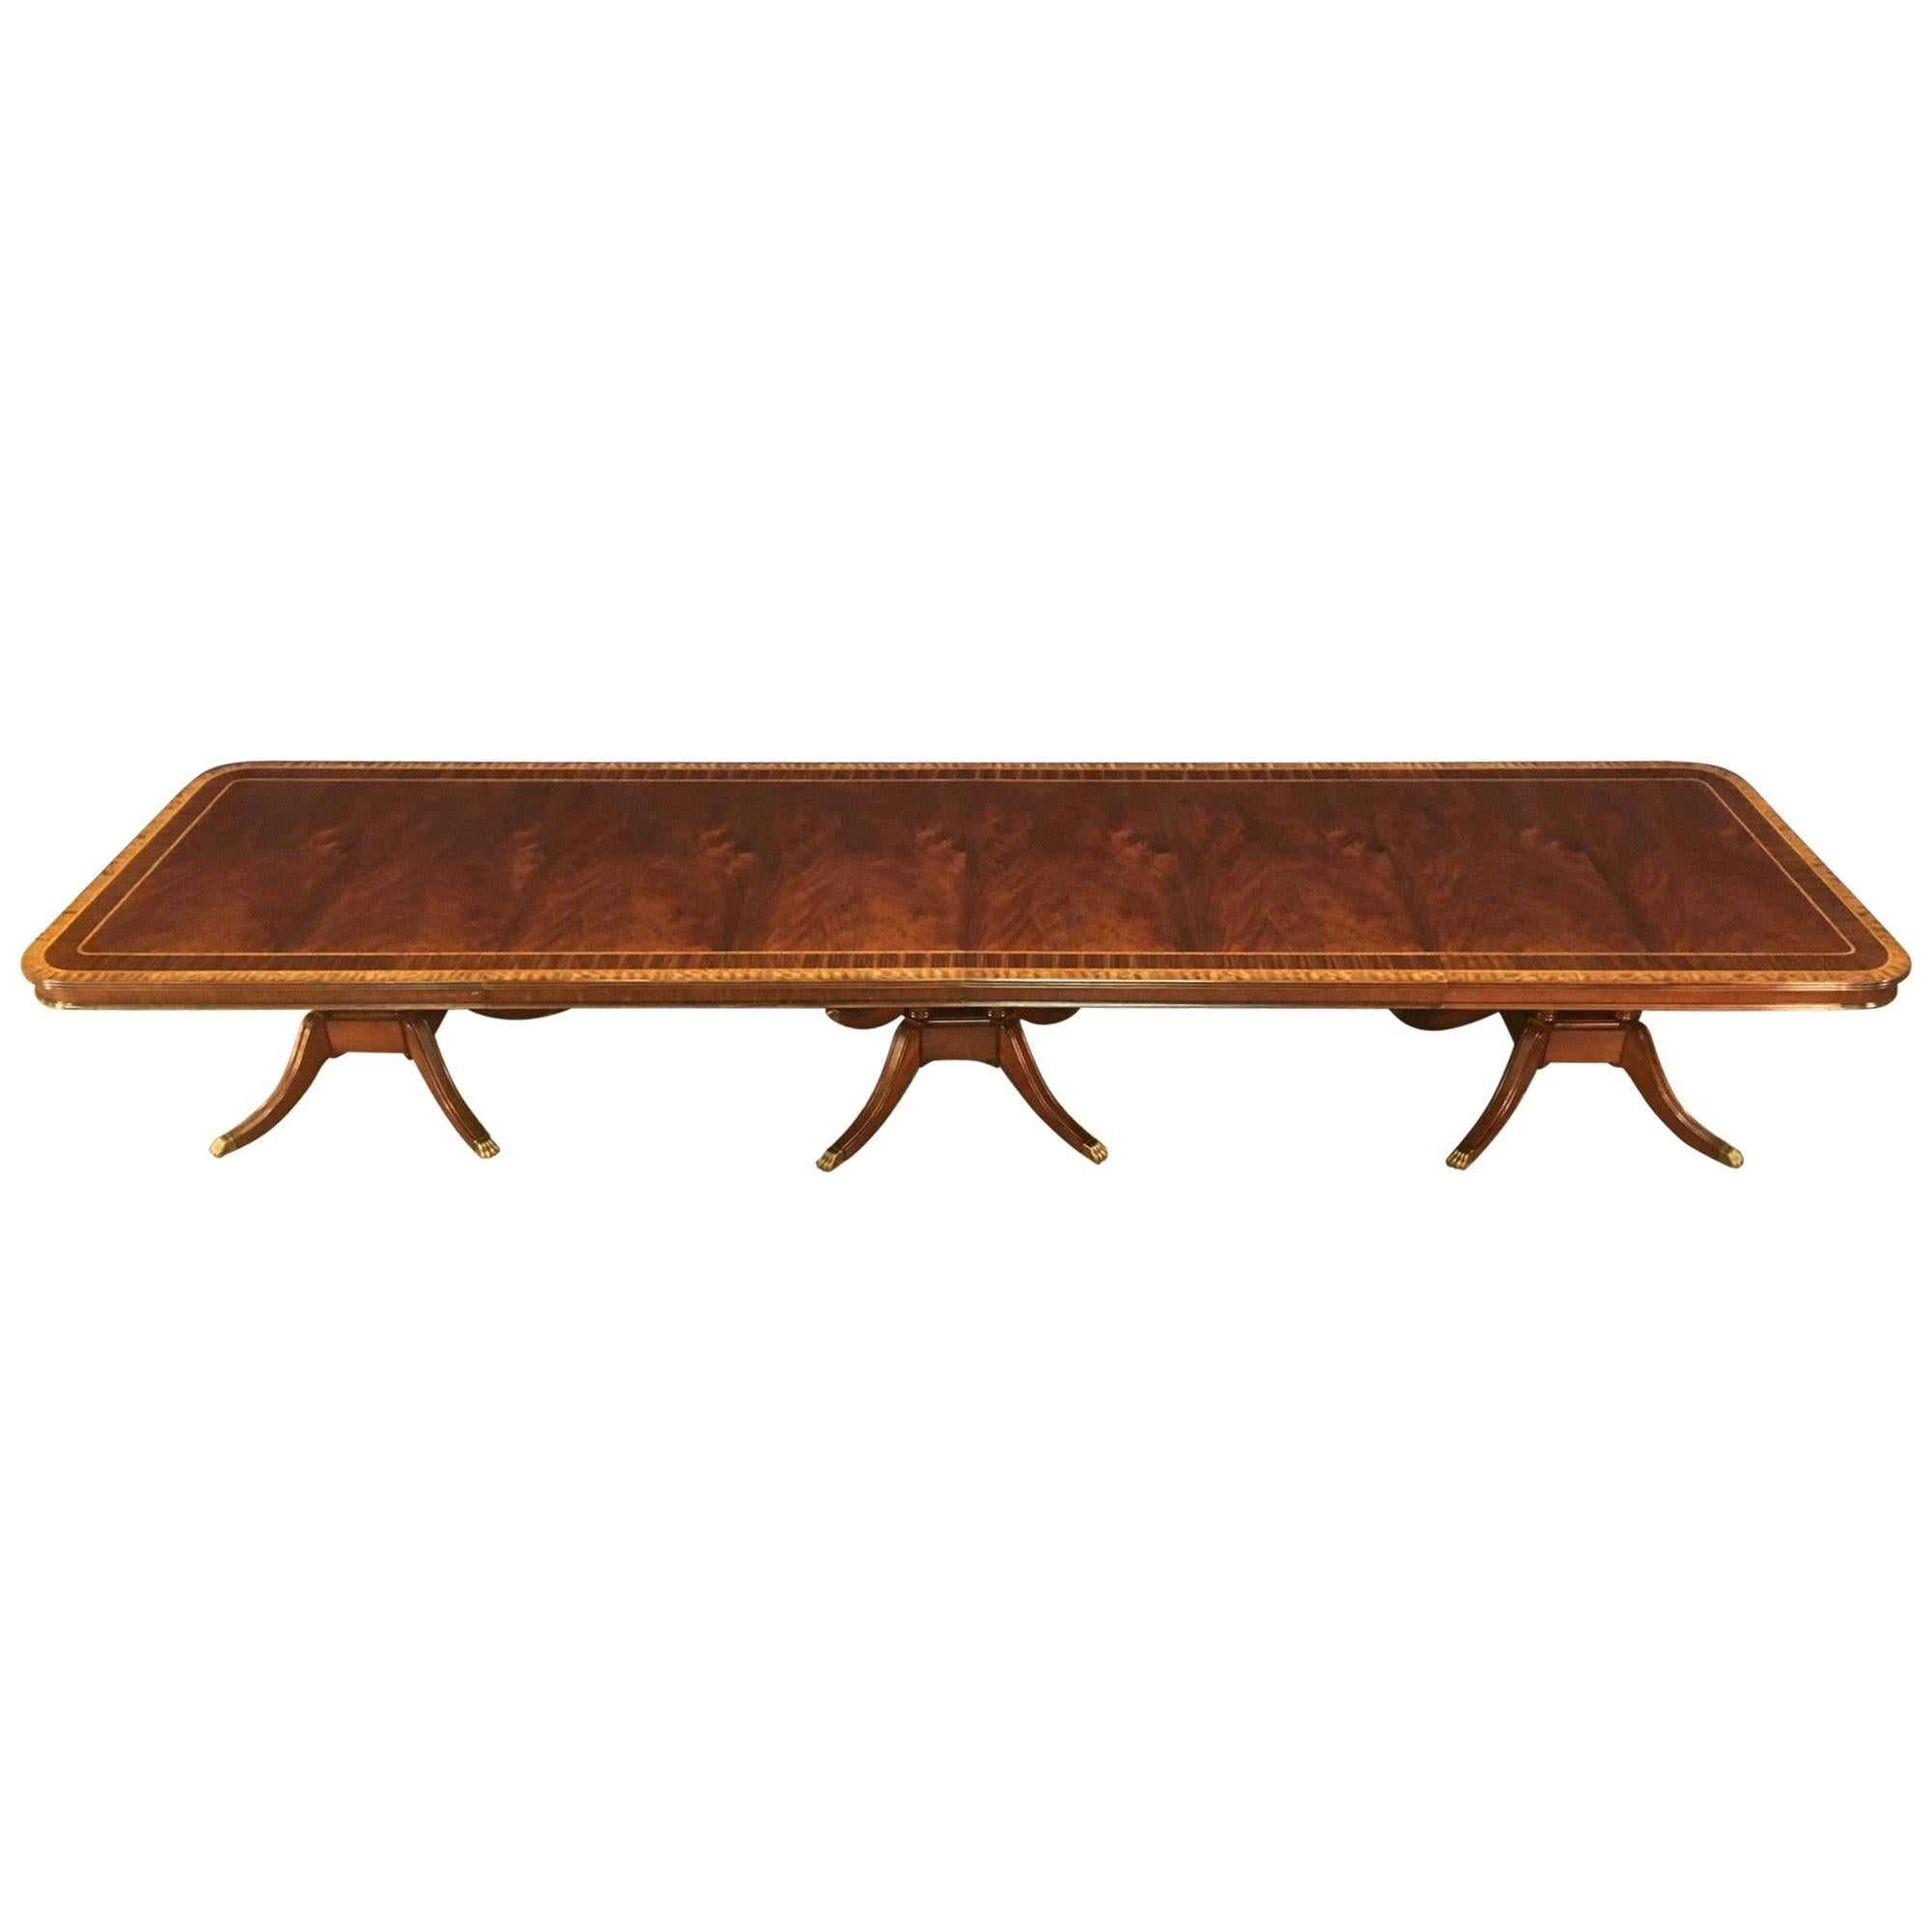 Custom Large 16 ft. Mahogany Banquet Dining Table by Leighton Hall For Sale